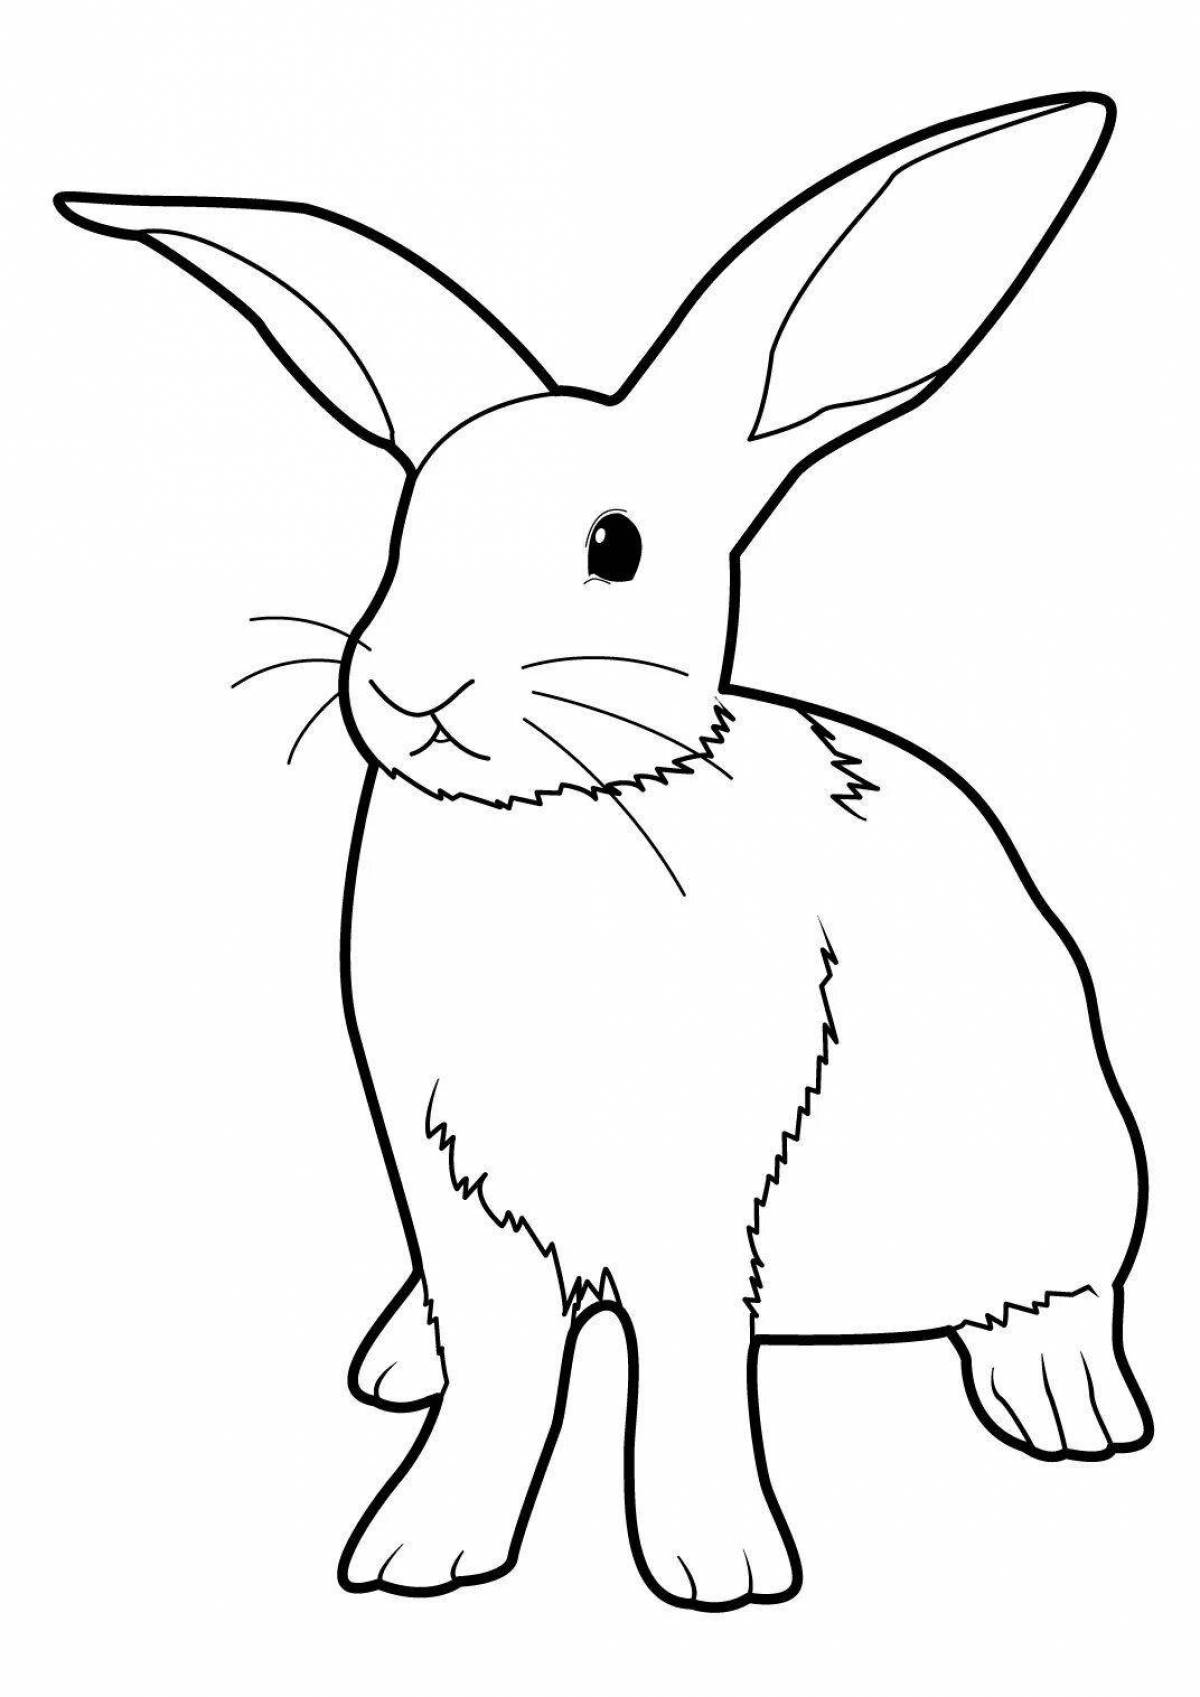 Cute drawing of a hare